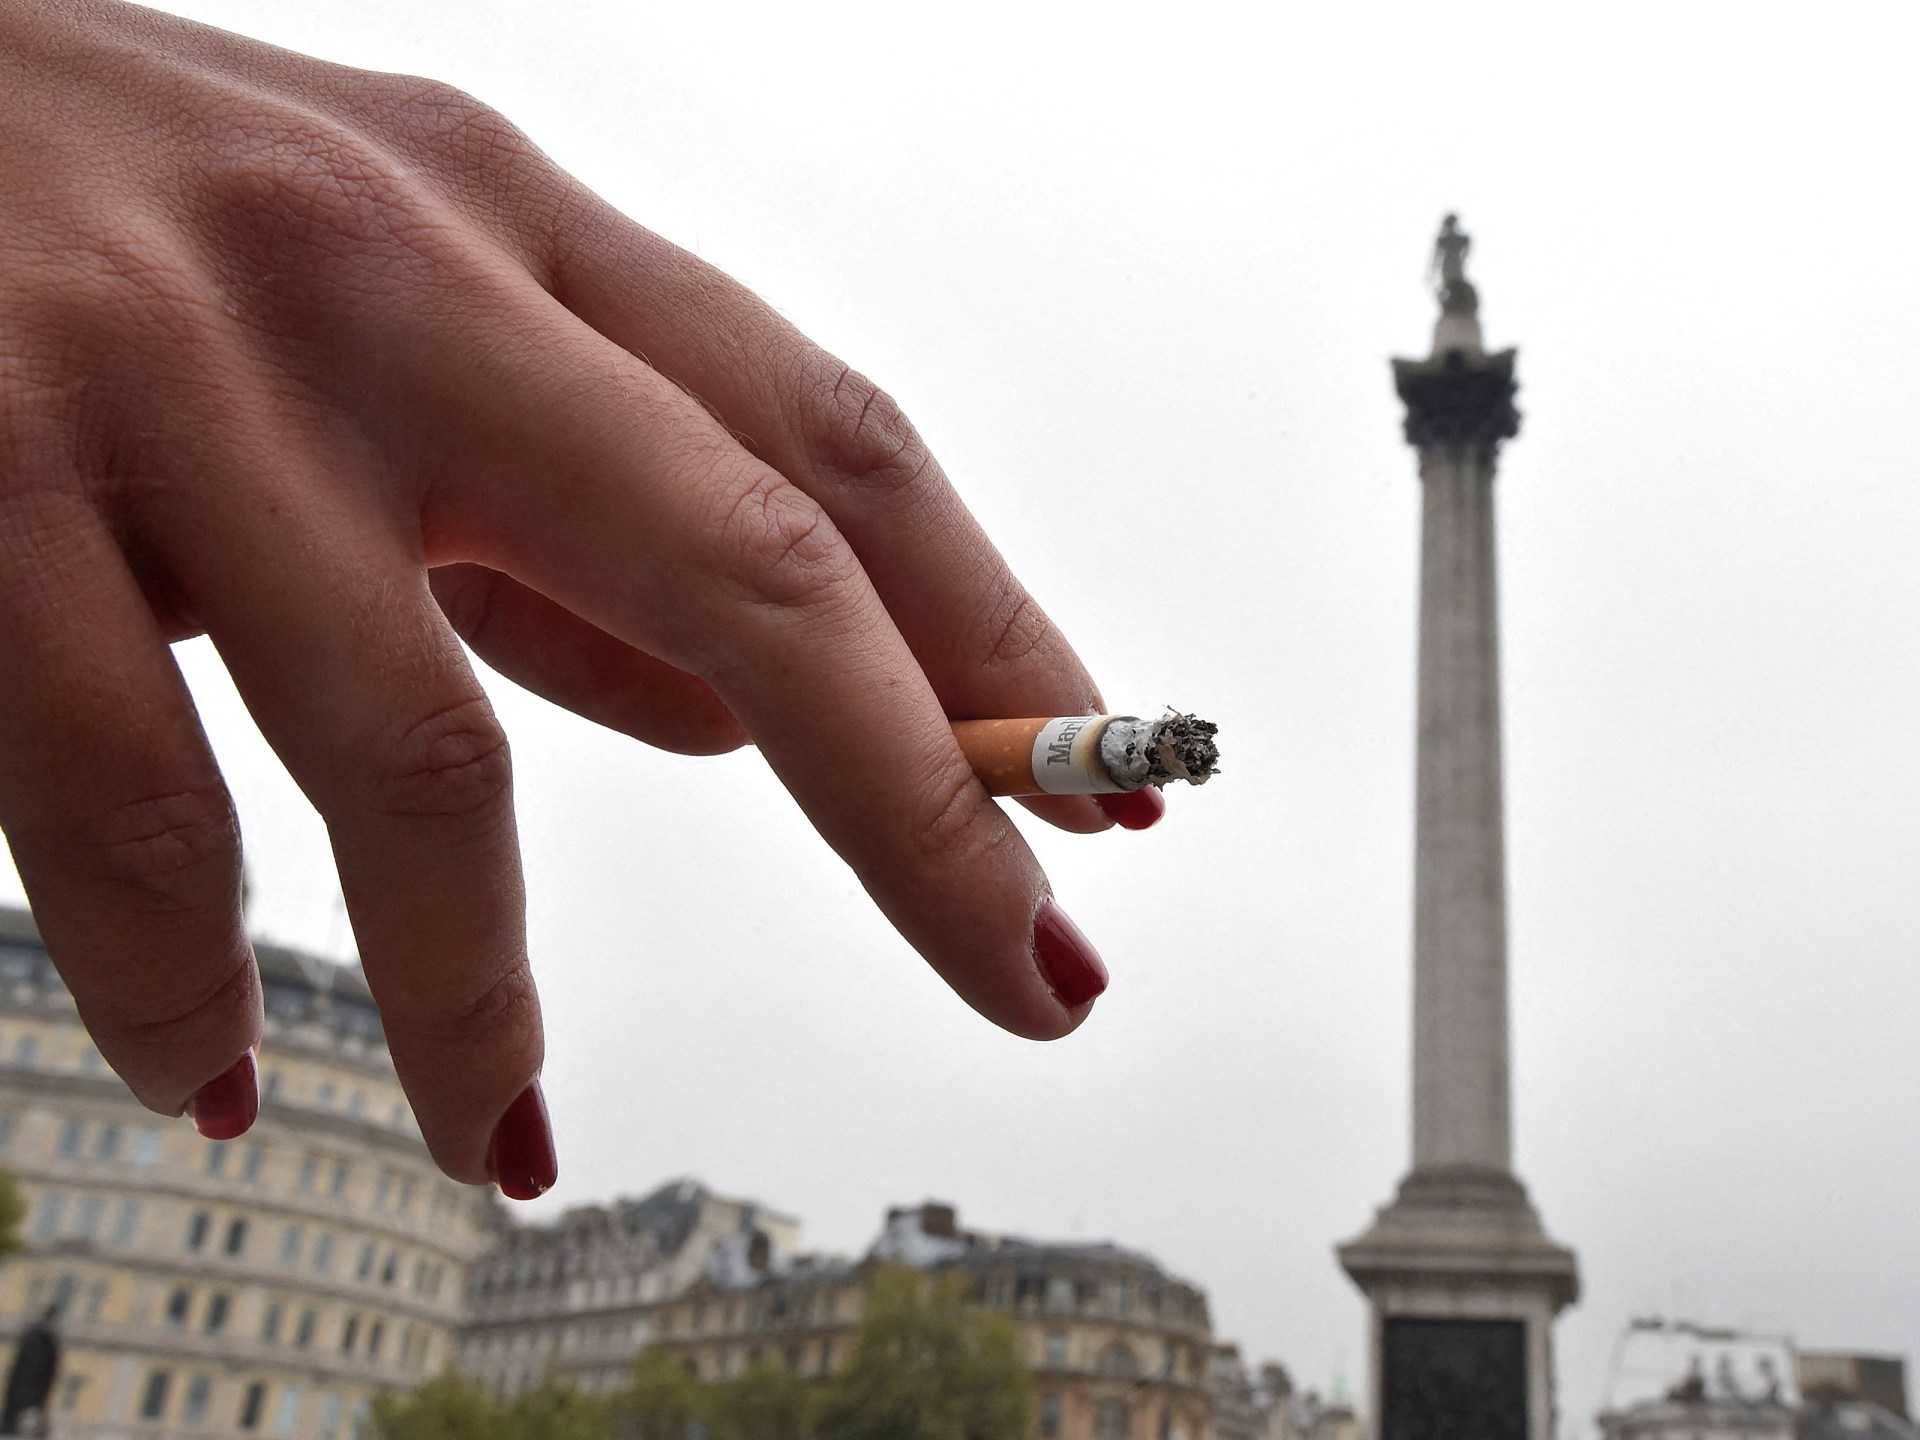 UK set to ban tobacco sales for a ‘smoke-free’ generation. Will it work?